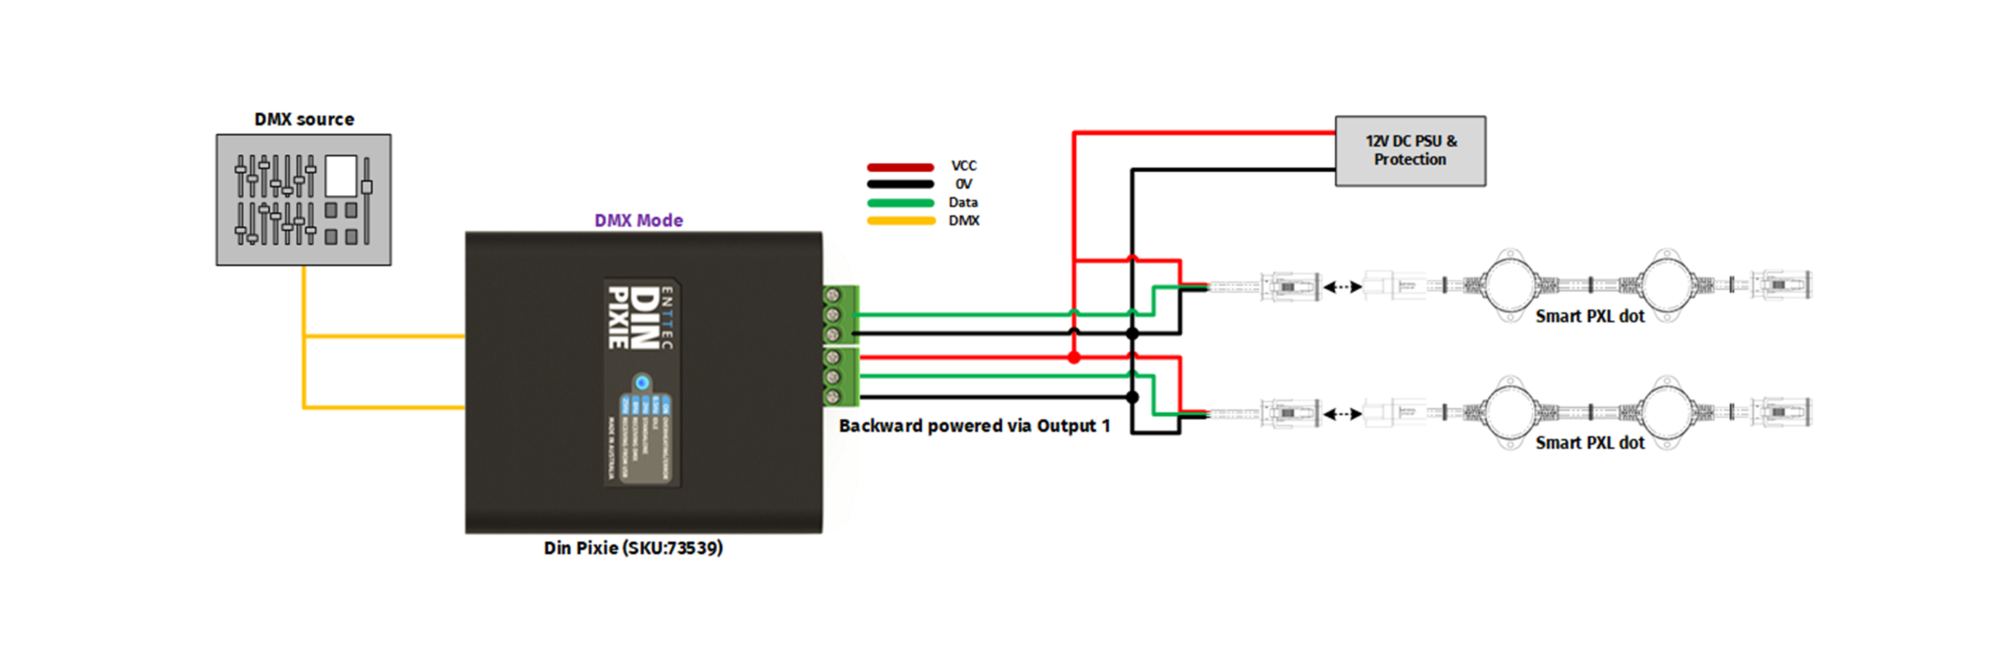 Wiring diagram of the DIN Pixie DMX to SPI Converter showing setup with LED Pixel dots and PSU's attached to both SPI output ports.